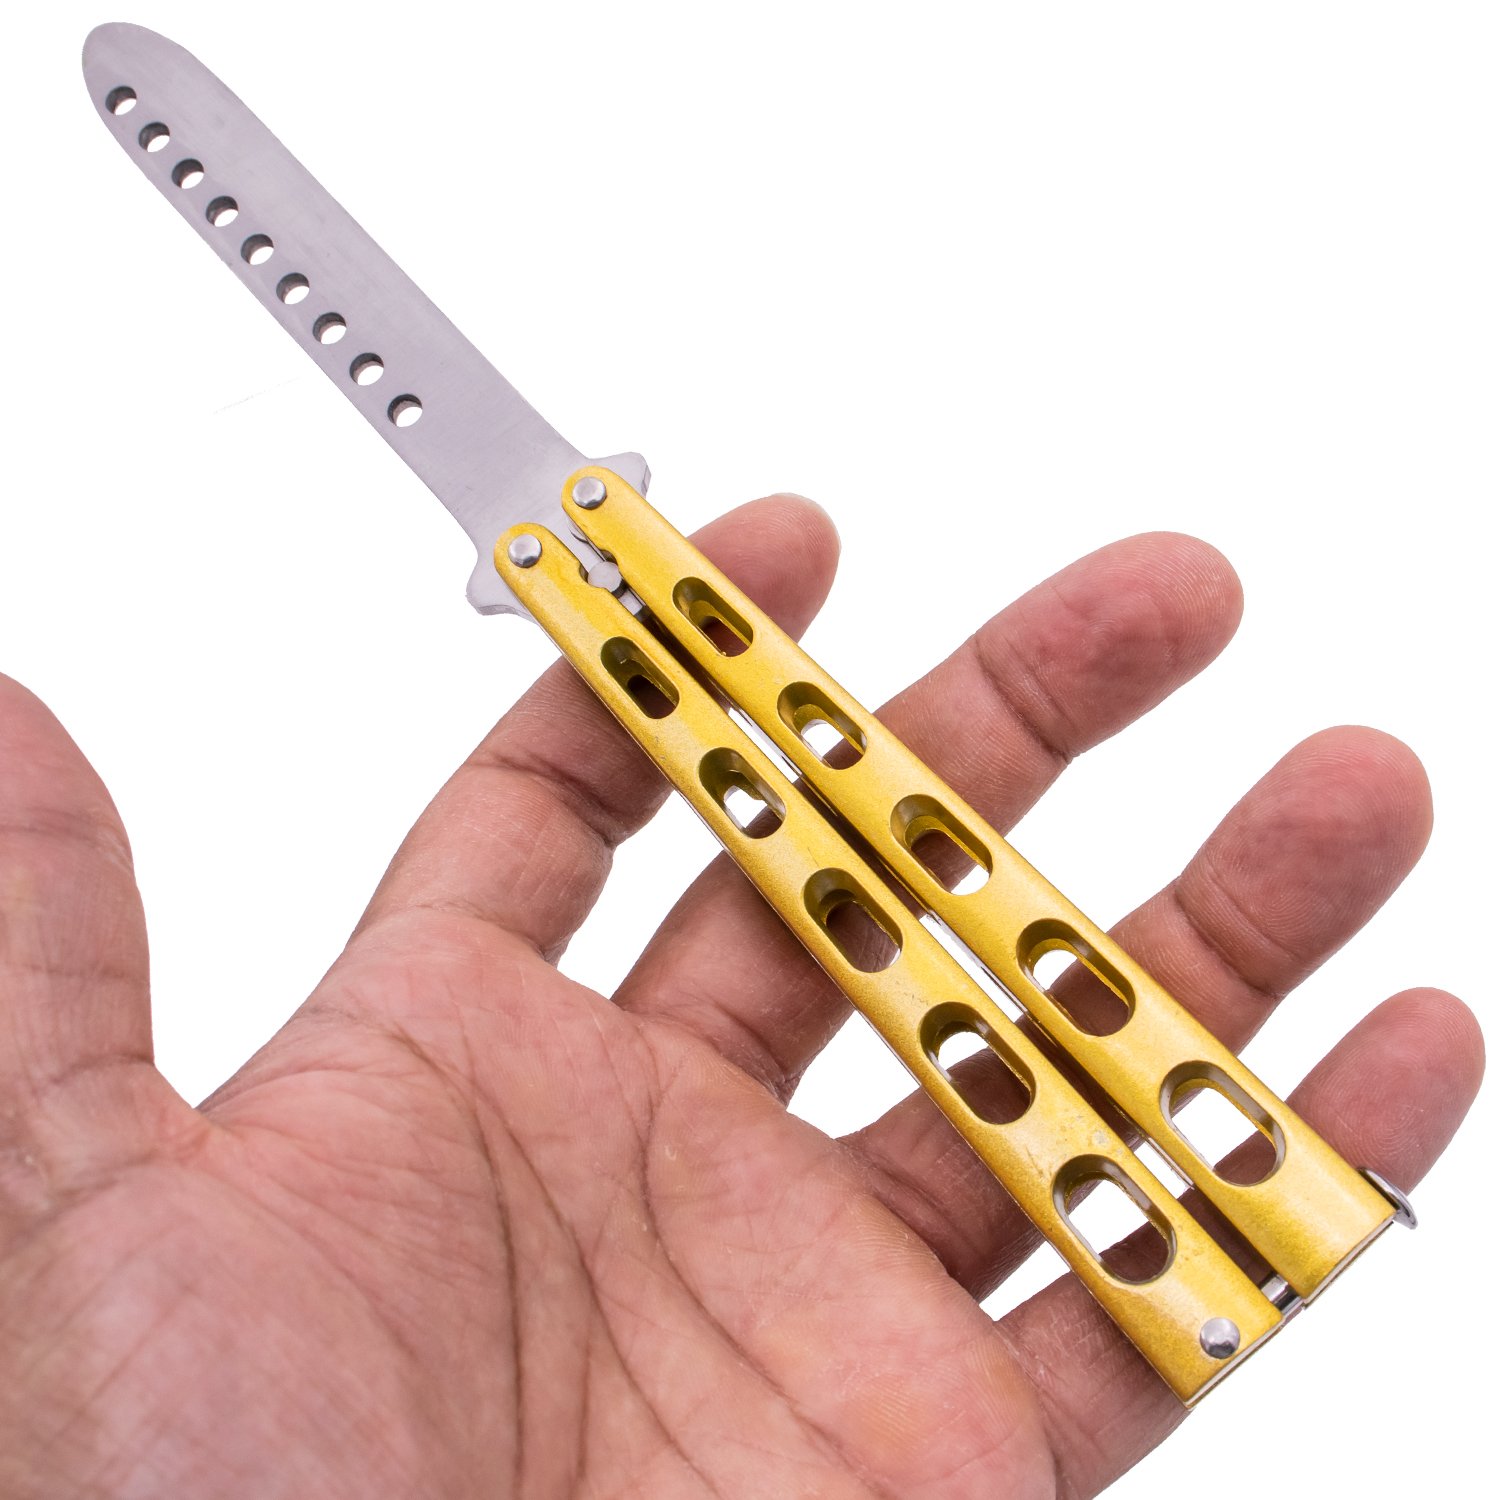 Tiger USA Butterfly Training Knife 440 Stainless 8.85 Inch   Gold Picture 2